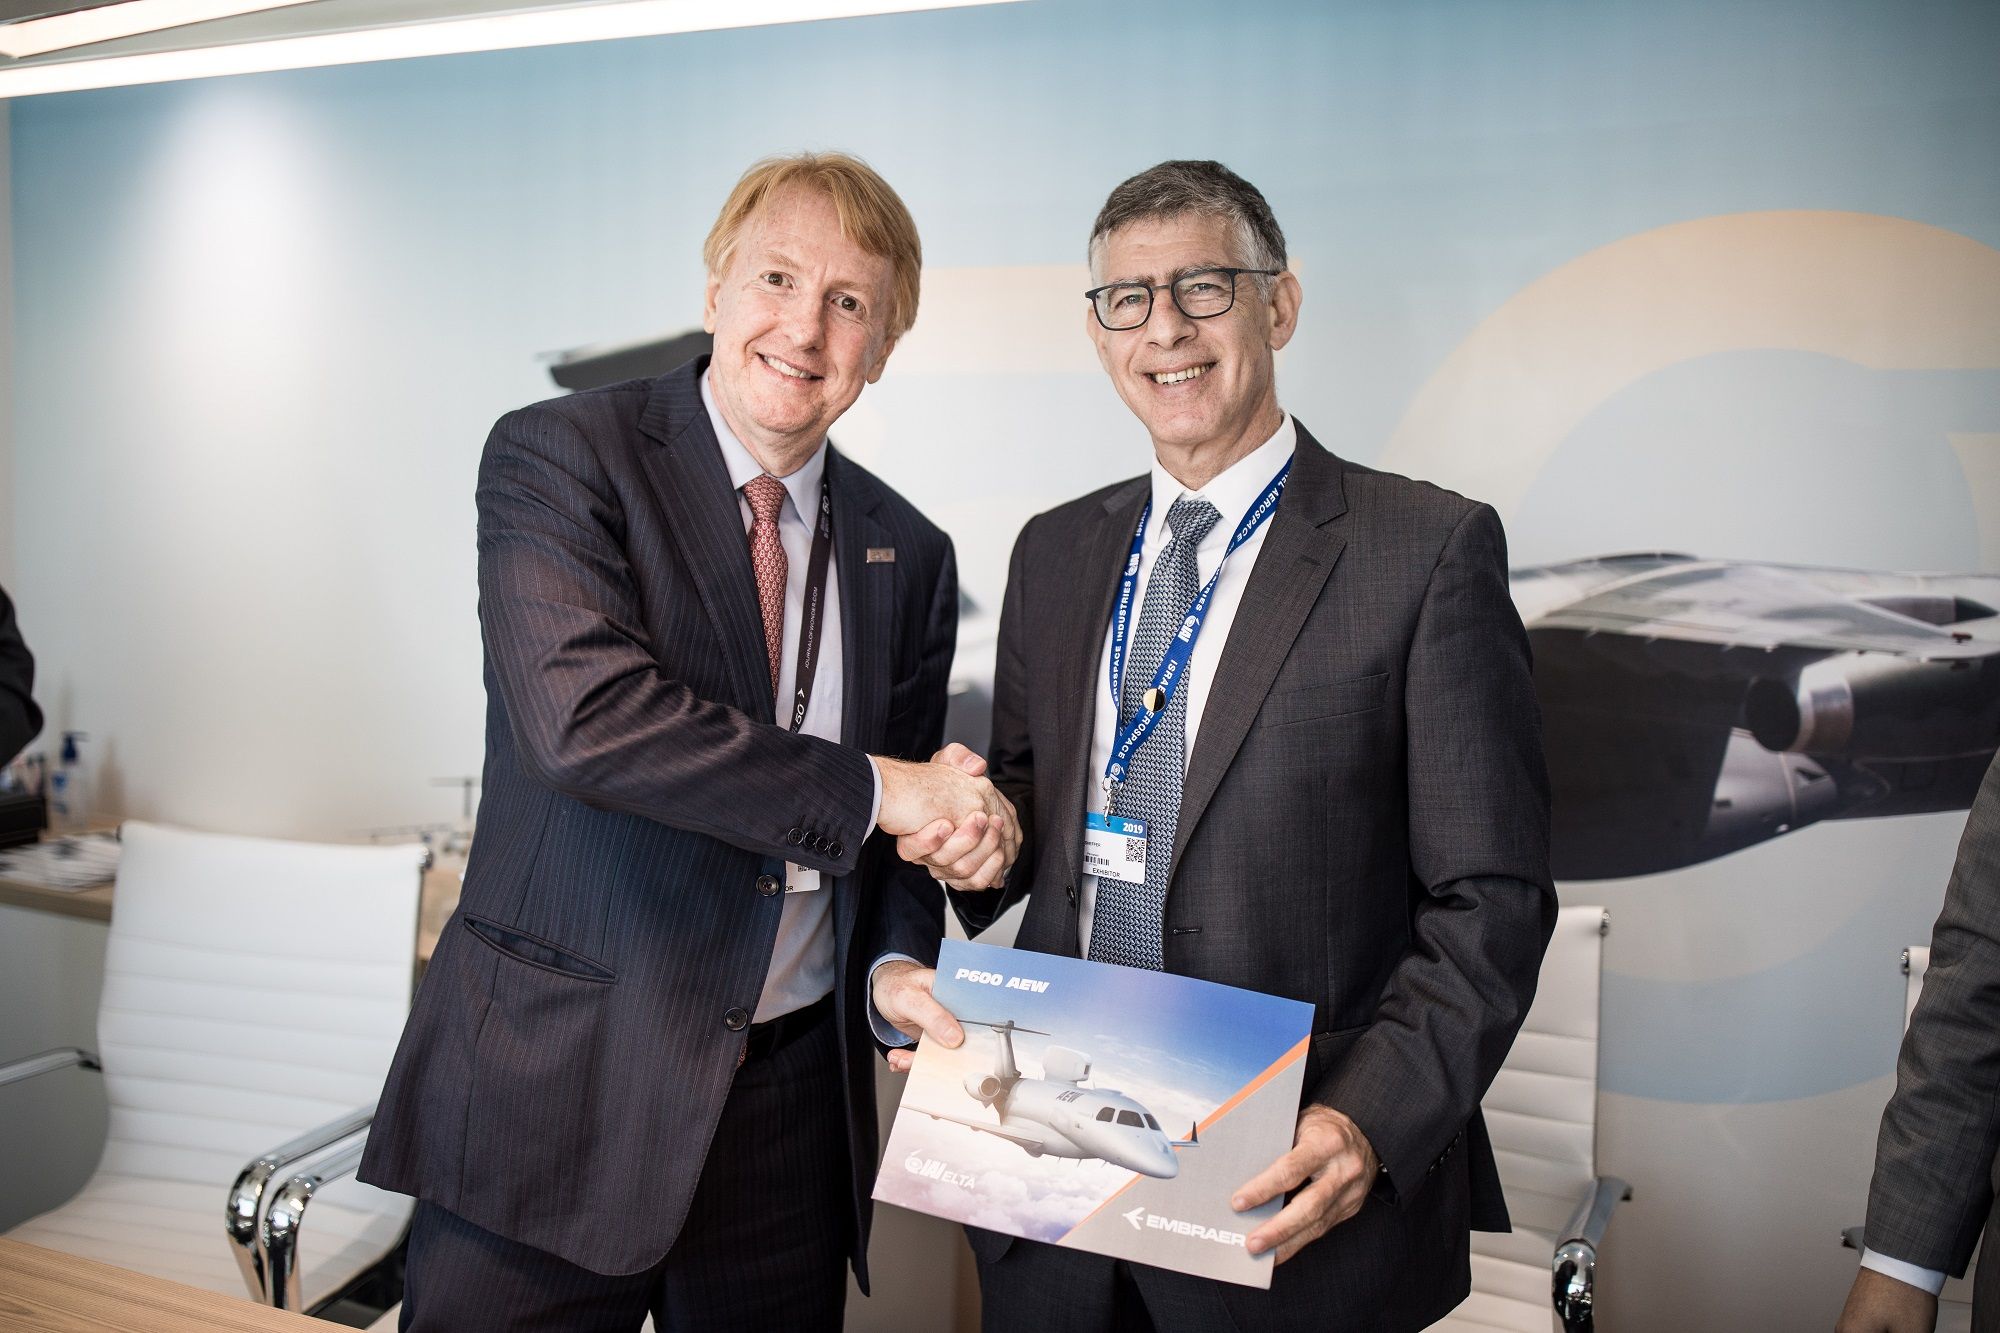 At Paris Air Show on 18 June, Jackson Schneider, President & CEO Embraer Defense & Security and Nimrod Sheffer, President and CEO sign signed a Strategic Cooperation Agreement to introduce the P600 AEW (Airborne Early Warning) aircraft.